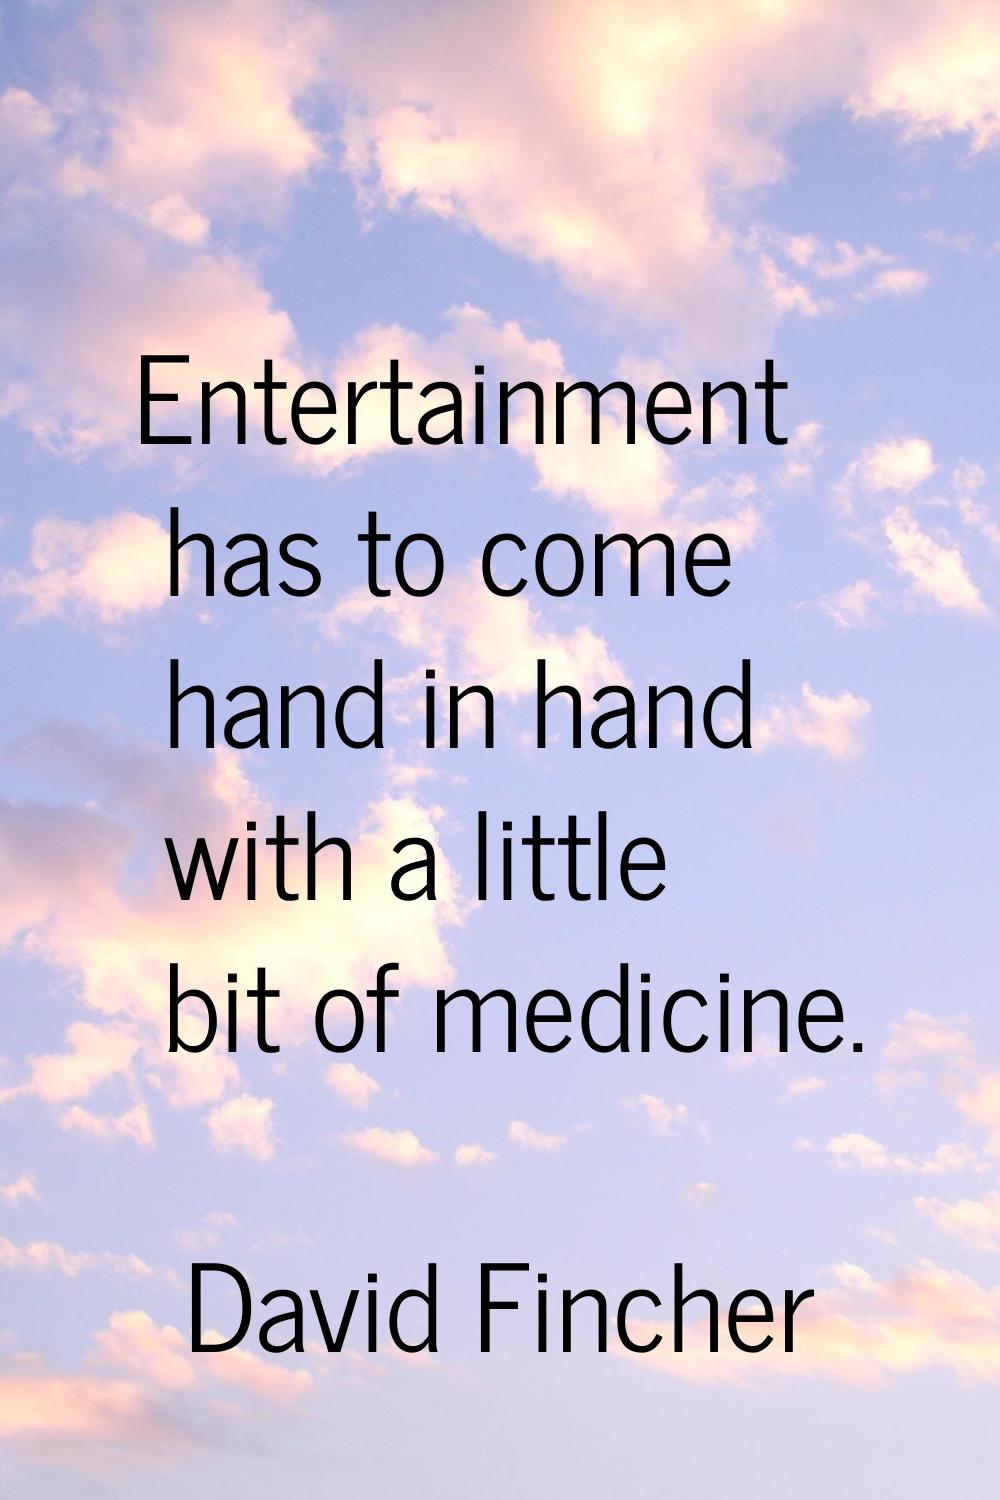 Entertainment has to come hand in hand with a little bit of medicine.